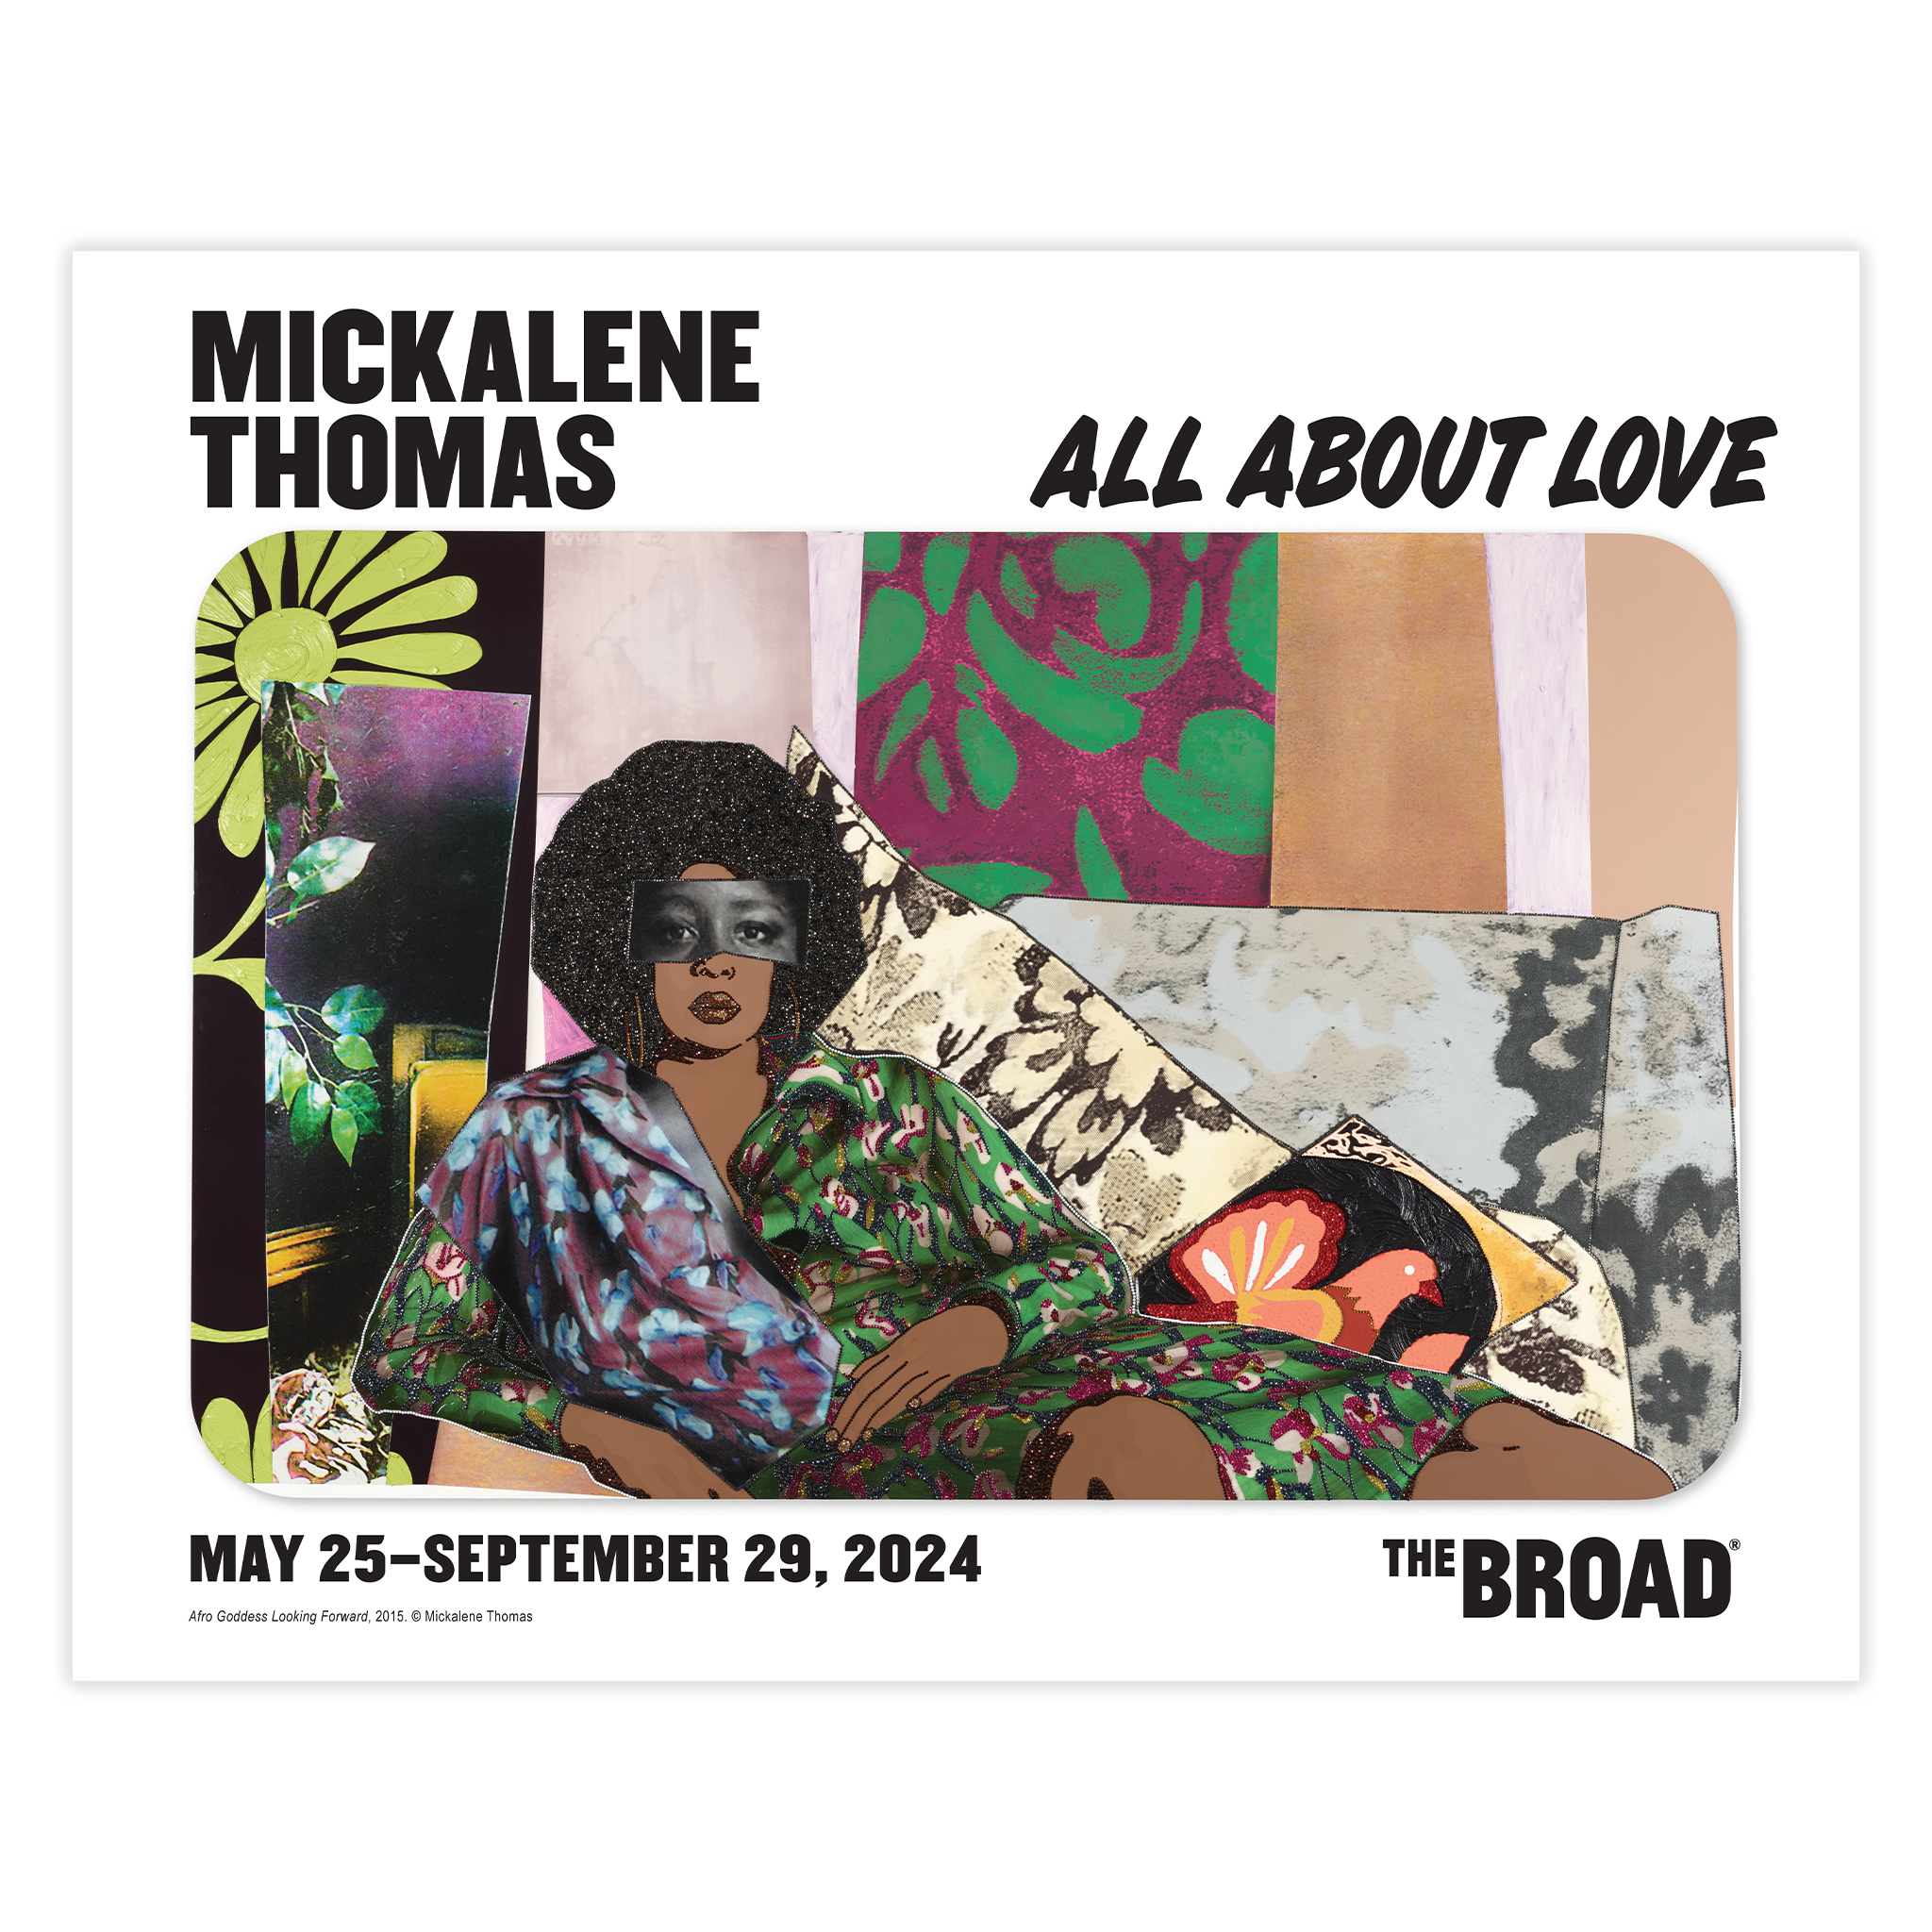 Mickalene Thomas: All About Love Exhibition Poster